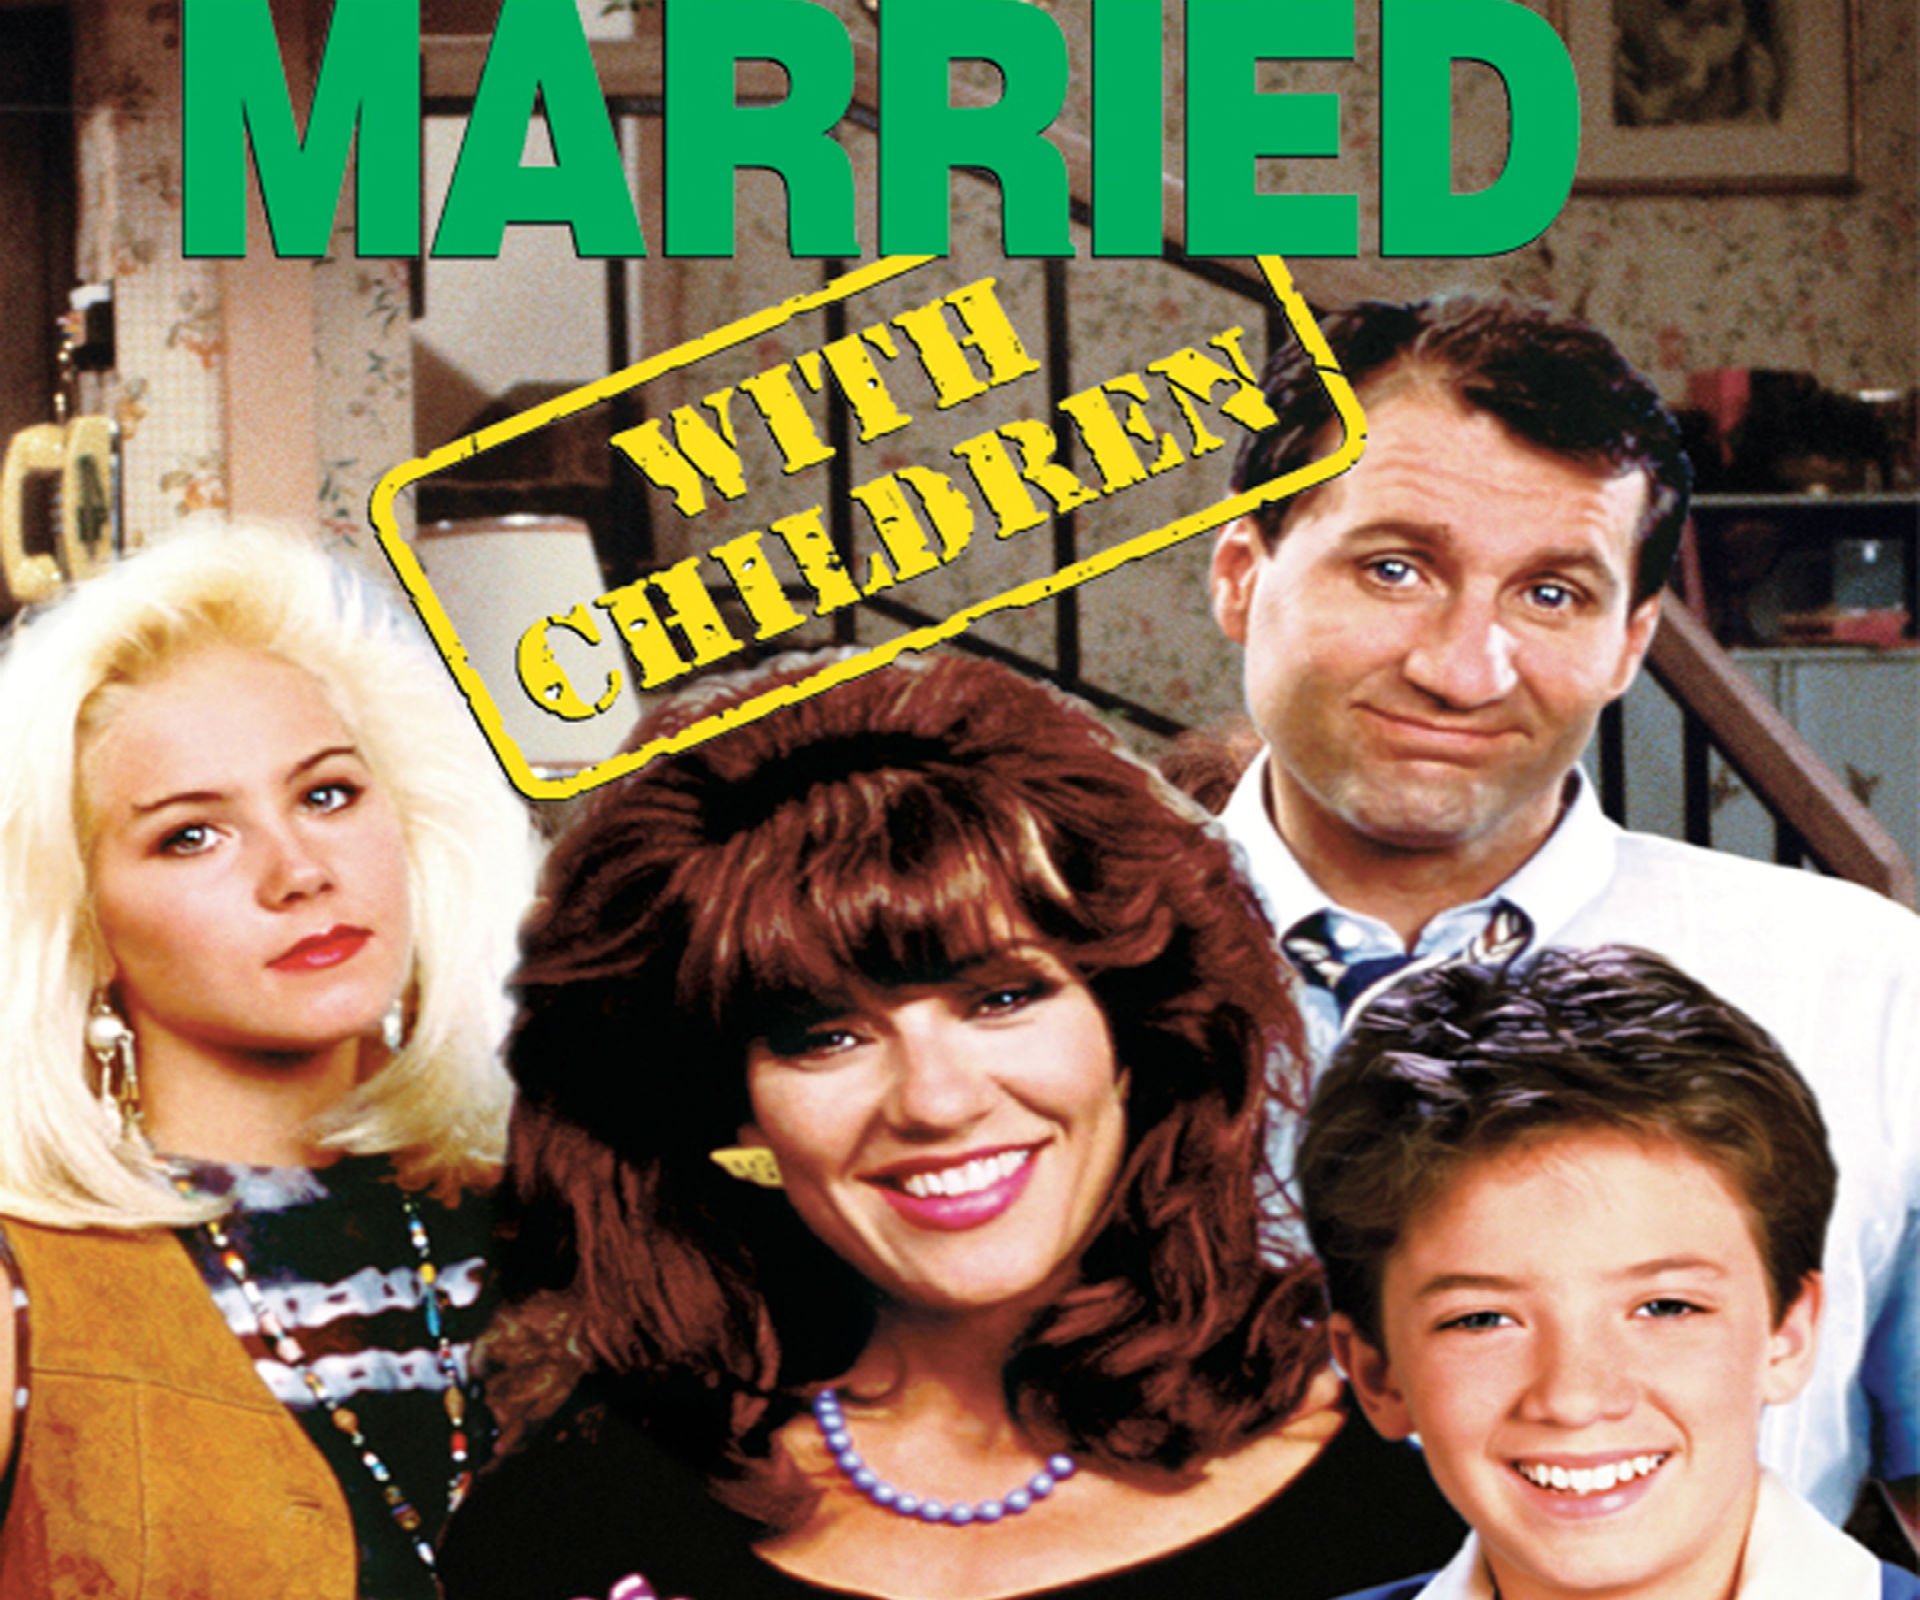 married with children, Comedy, Sitcom, Series, Television, Married, Children, Poster Wallpaper